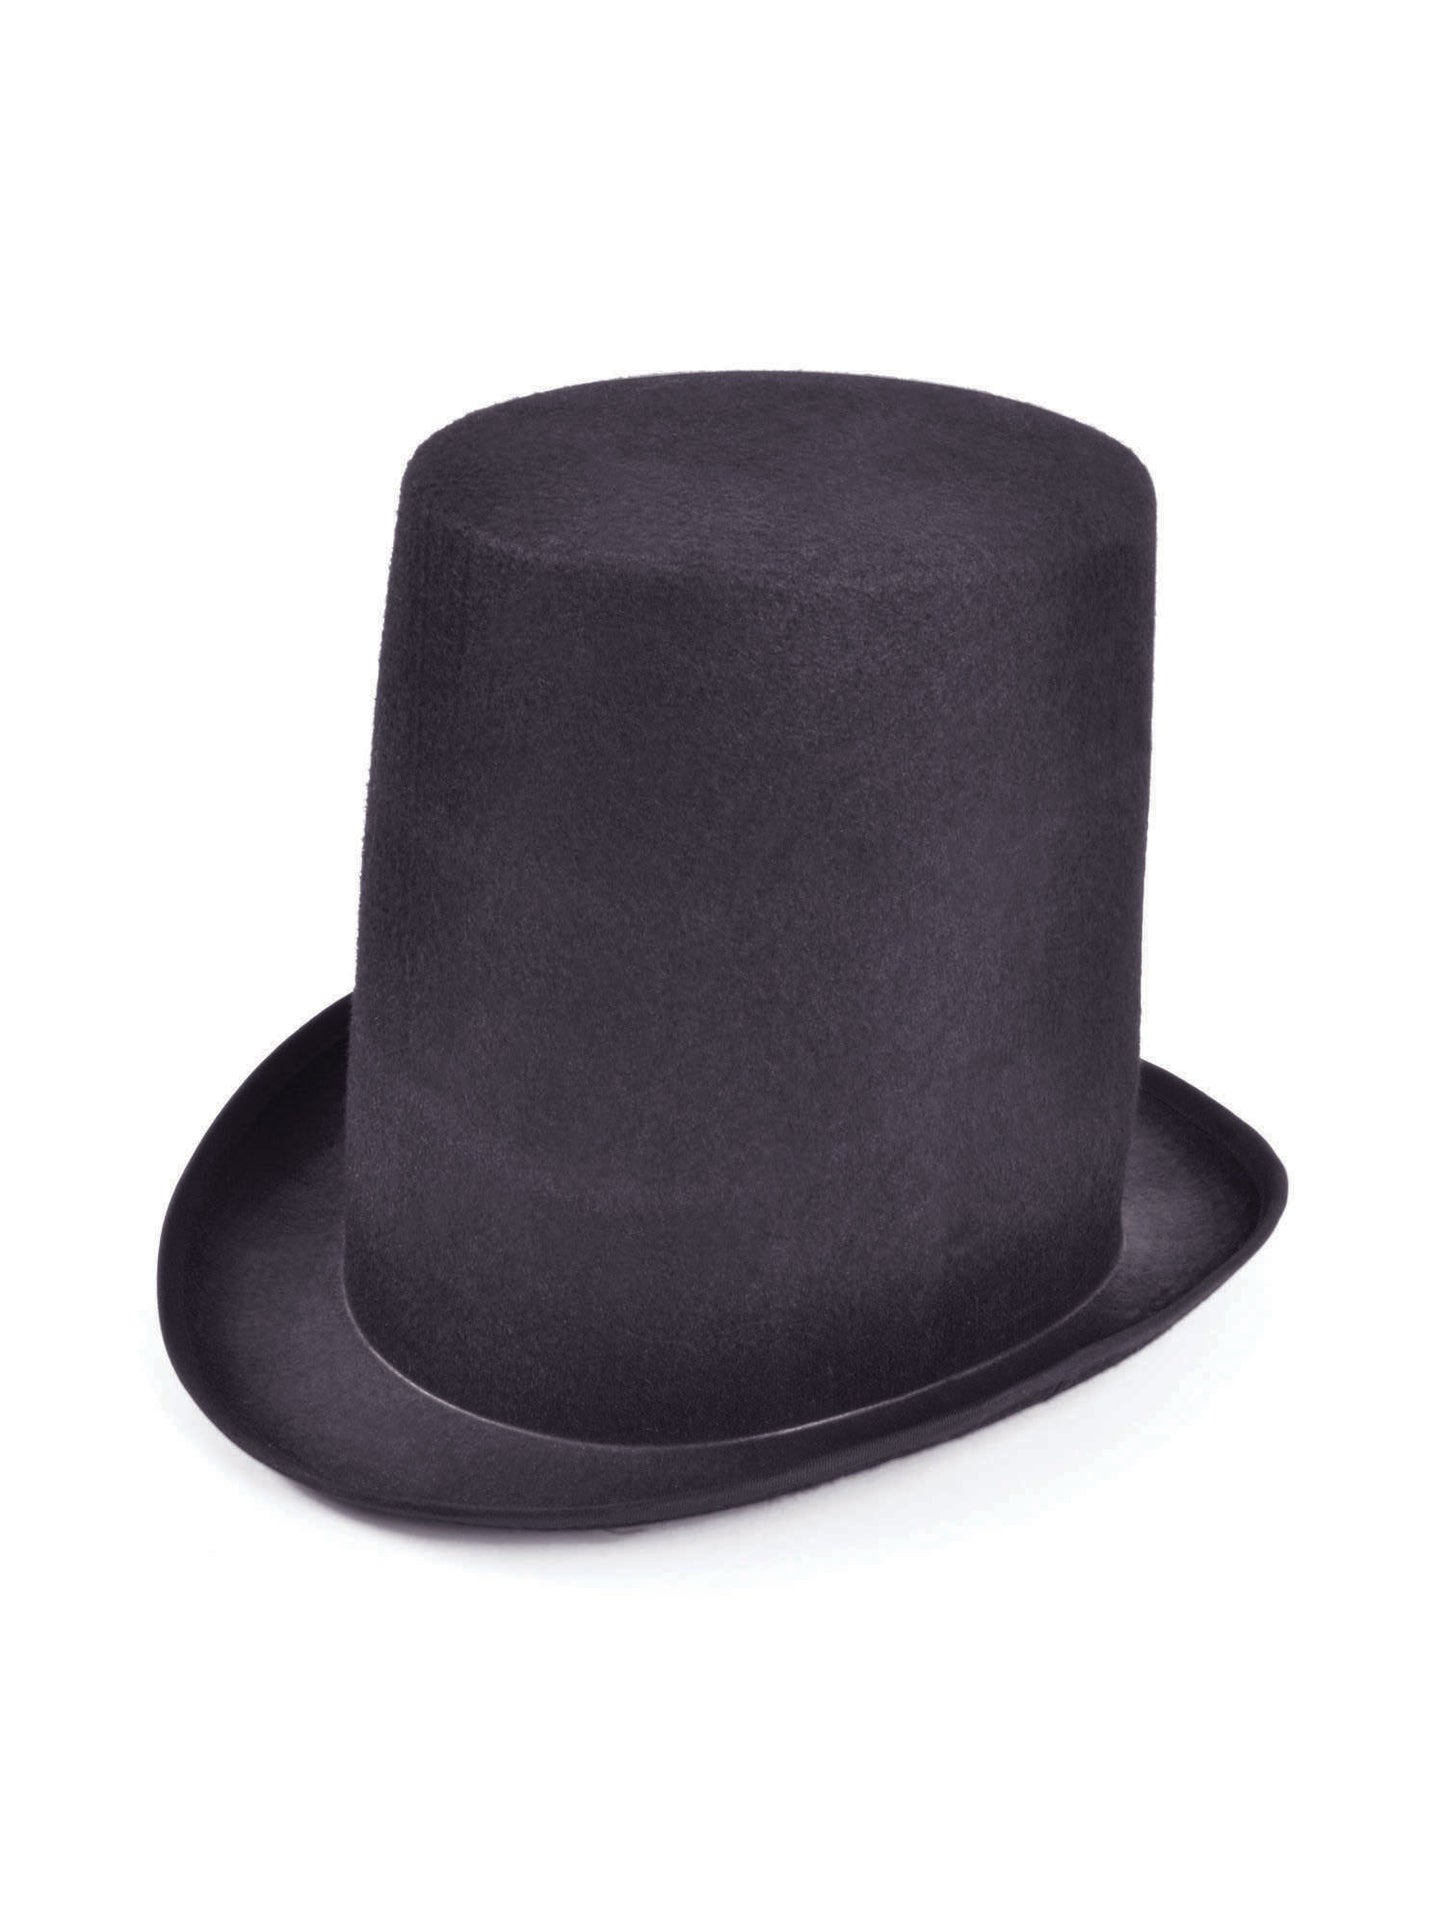 Stunning Stovepipe Top Hat with Black Cape, Magic Wand, and White Gloves - Complete Magician Costume Set for Unforgettable Performances